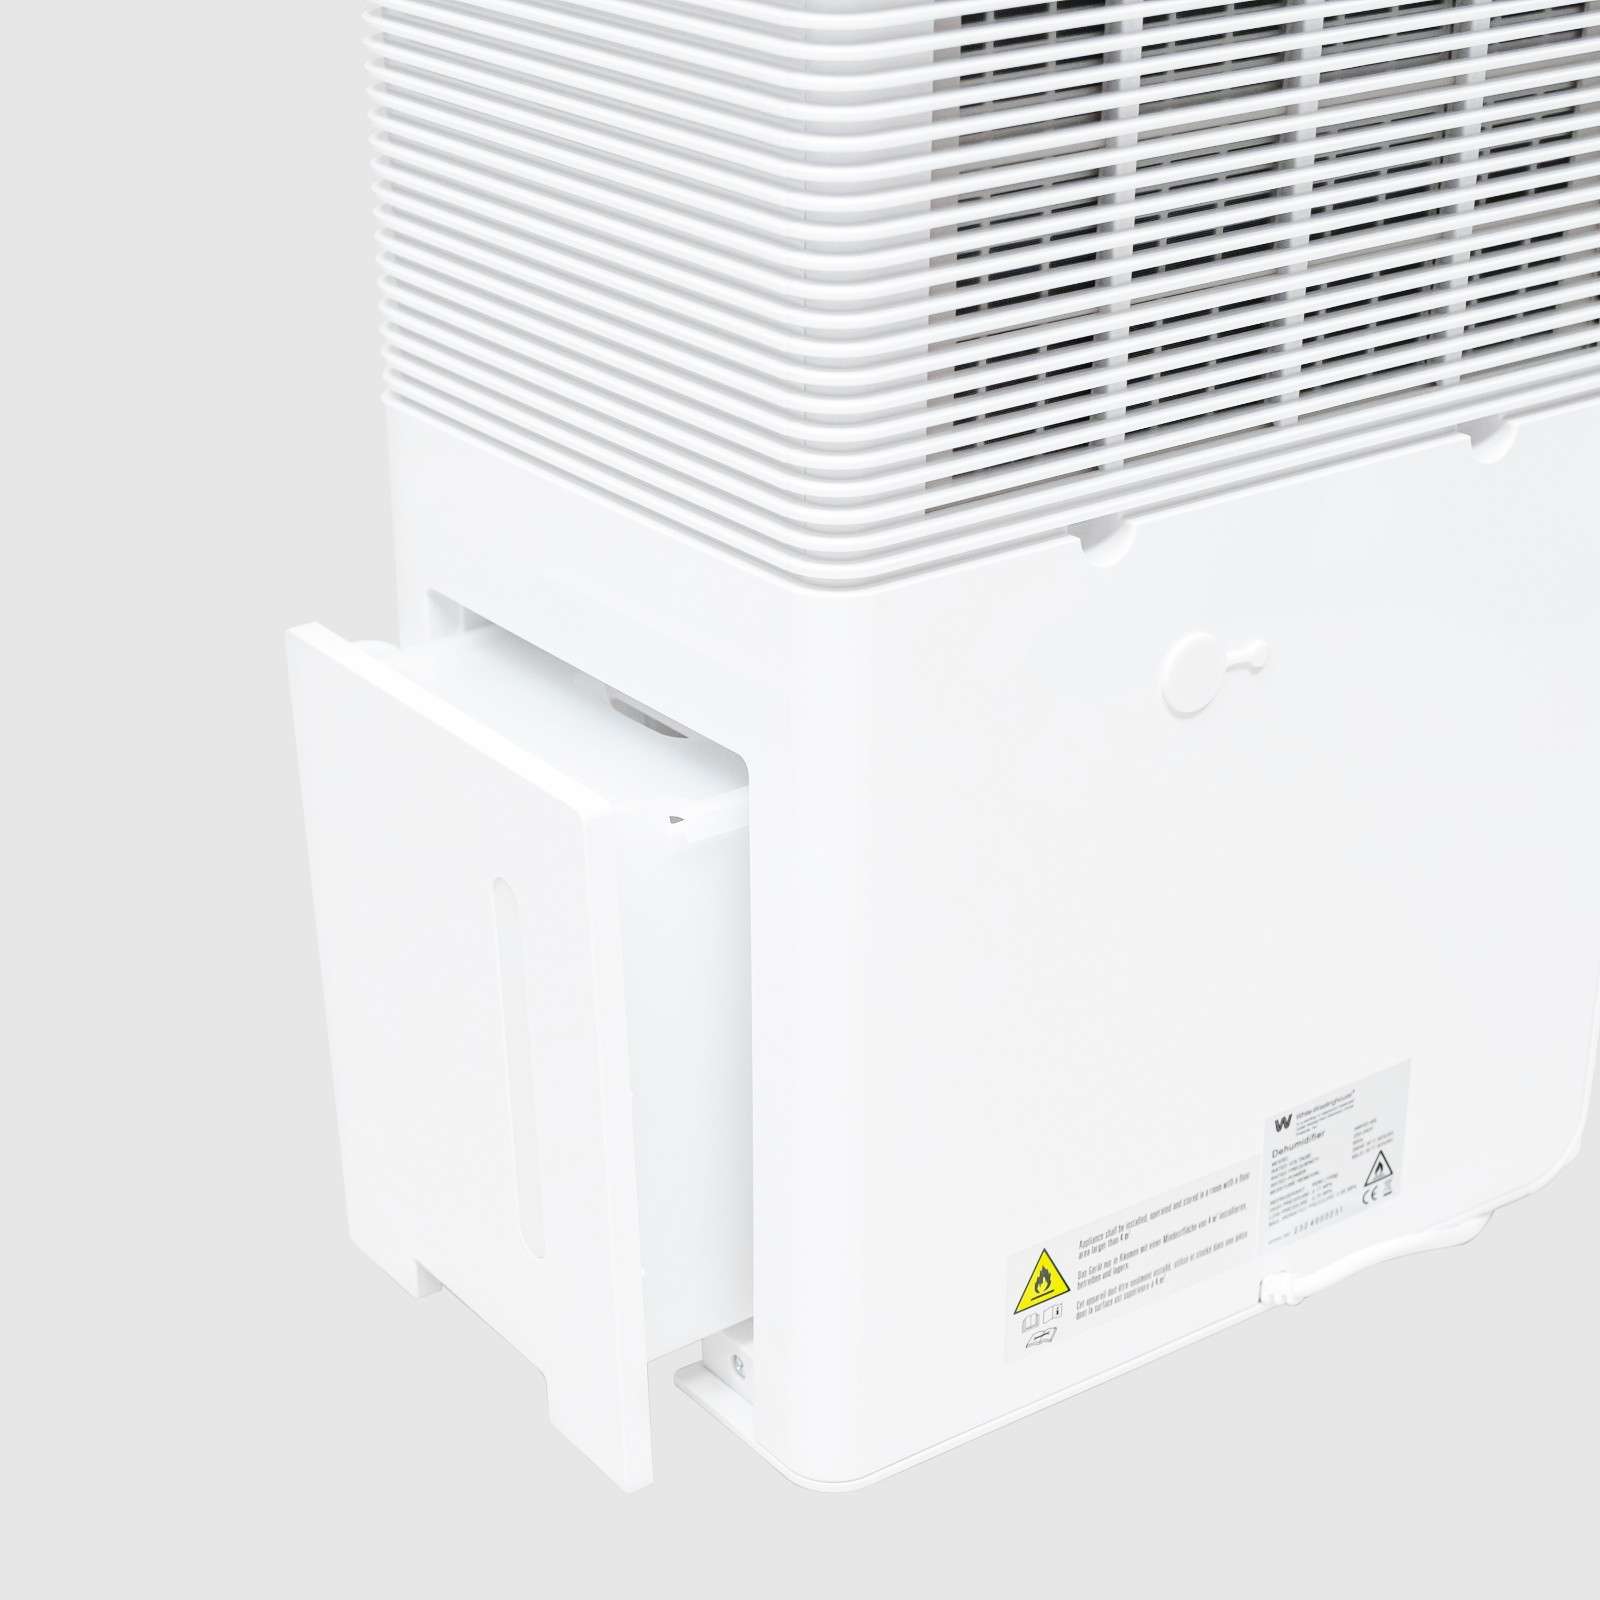 Close-up view of the White Westinghouse Dehumidifier AWHD40 with the water tank partially removed, showcasing the back air vent and water tank compartment. The sleek white design is suitable for maintaining optimal humidity levels in residential and commercial spaces.